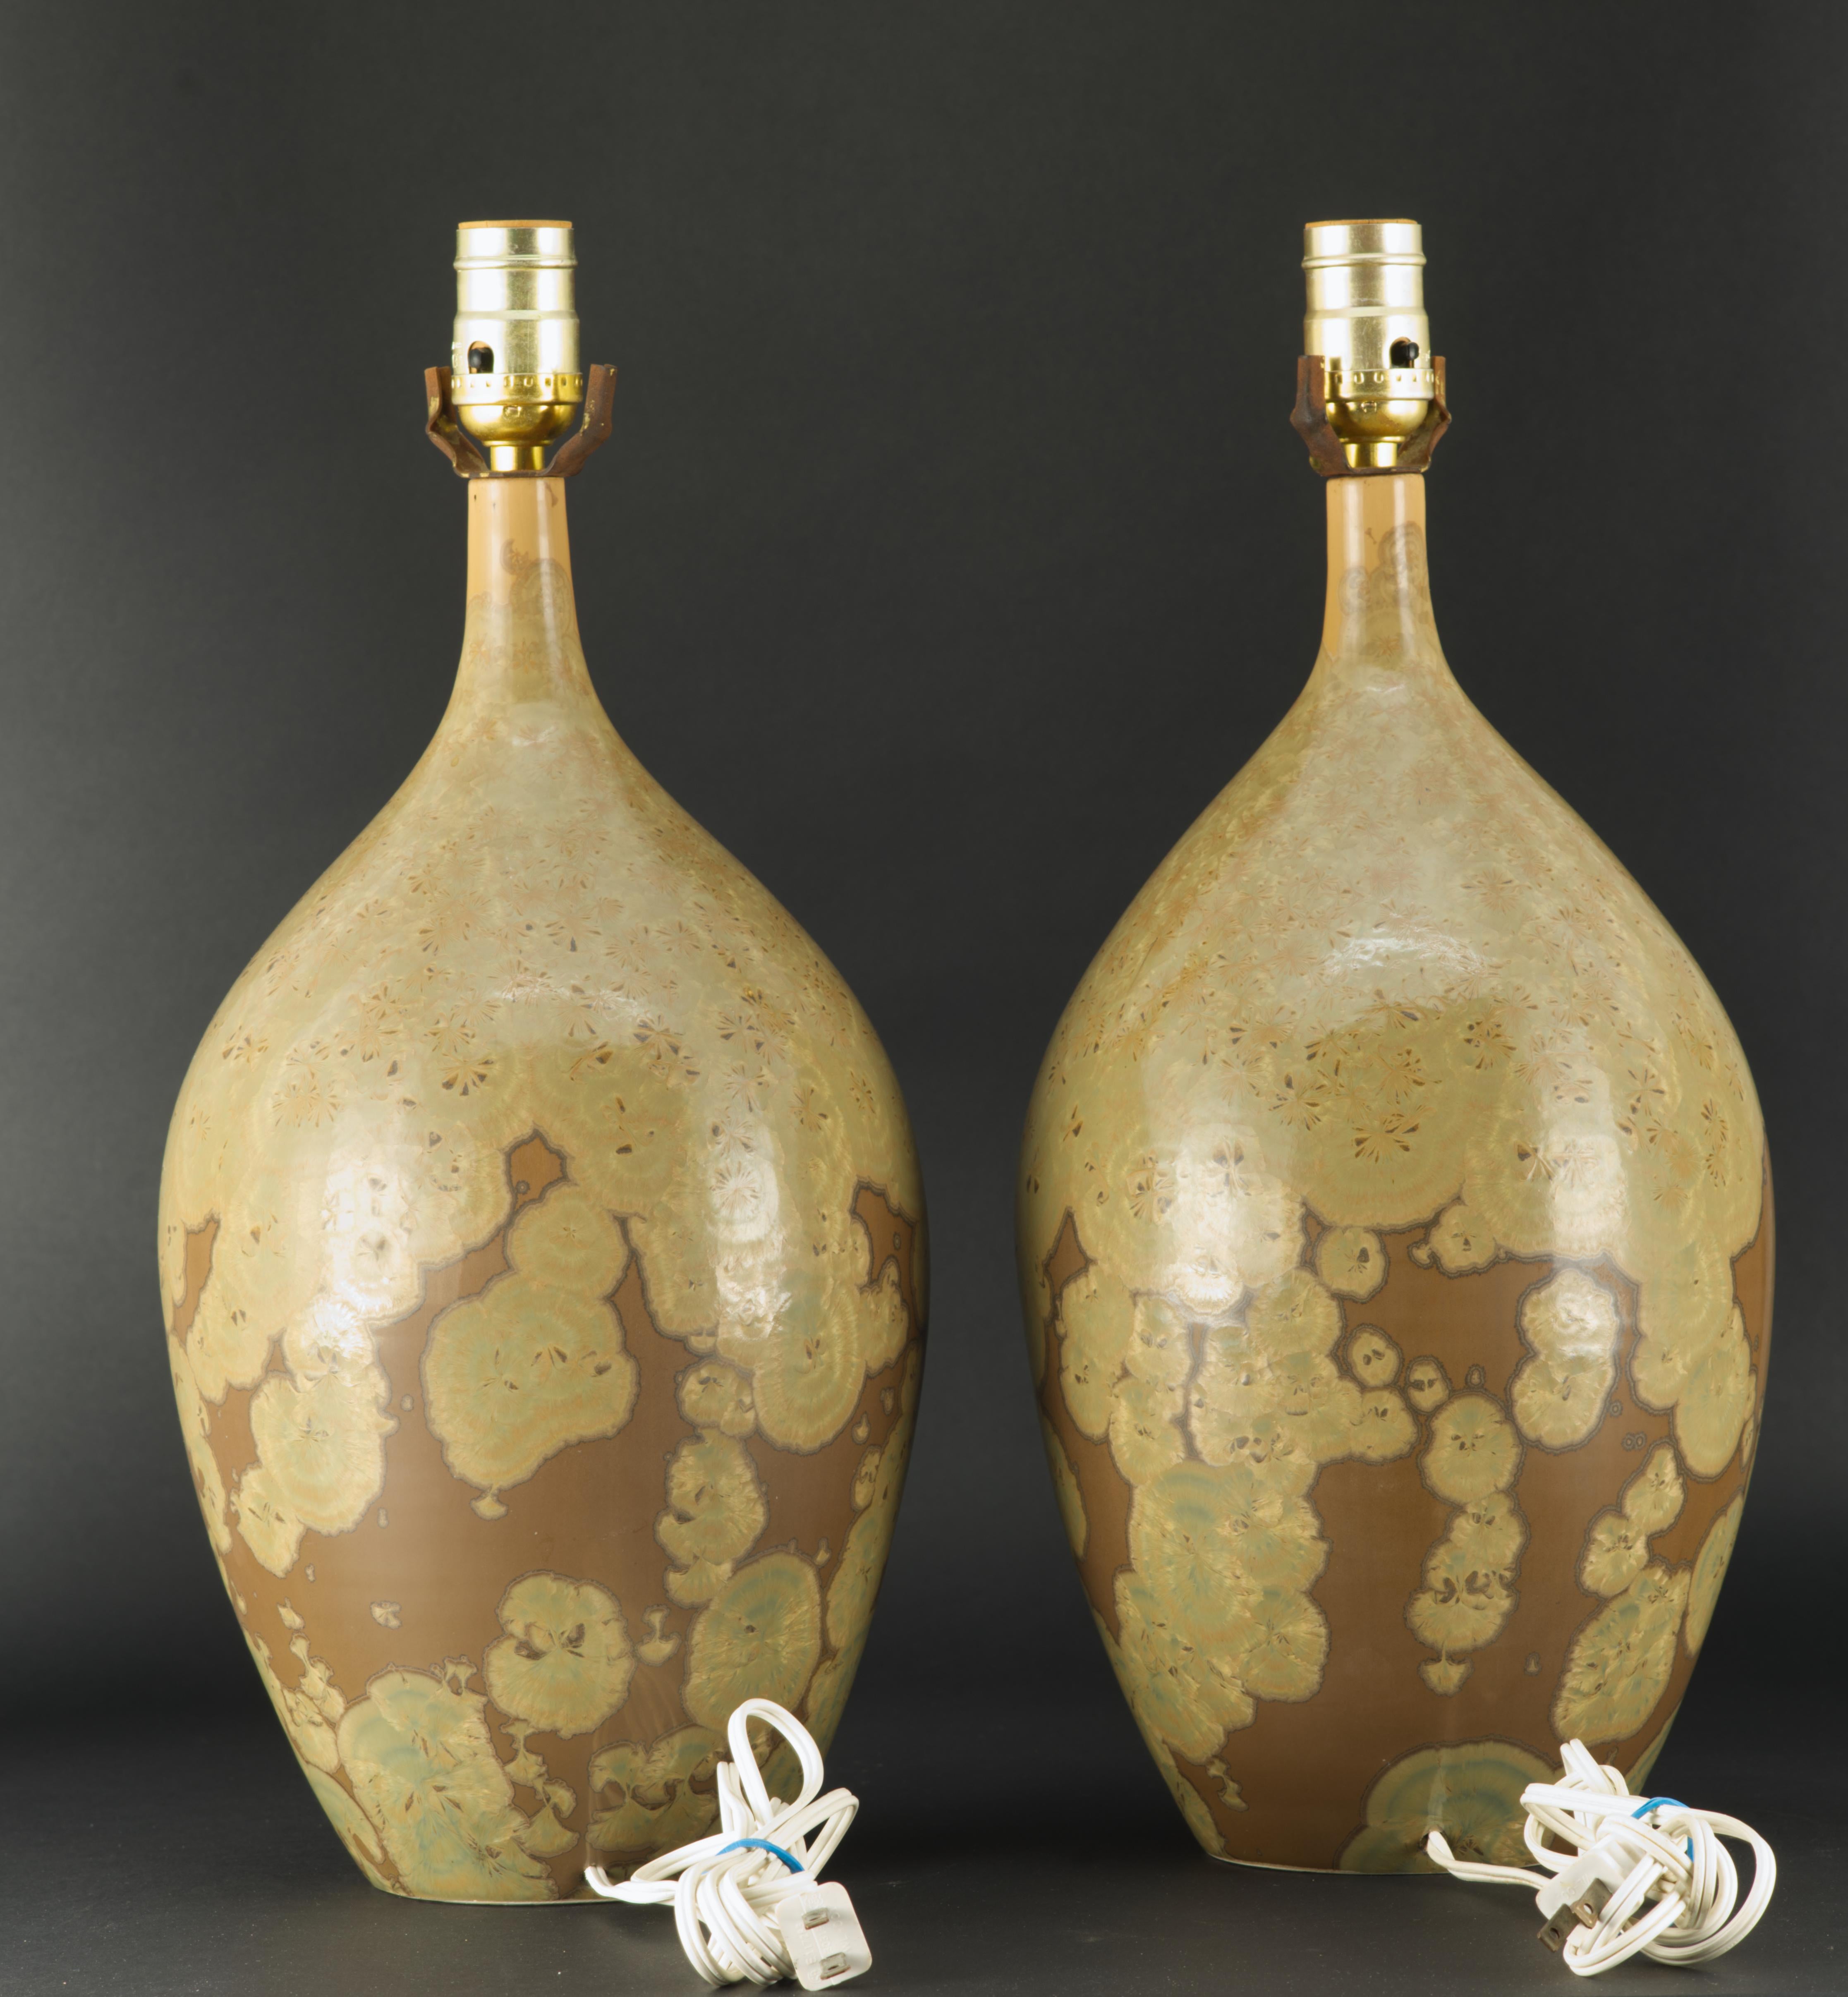 Pair of Organic Crystalline Glaze Hand Thrown Ceramic Lamps, American Studio  In Good Condition For Sale In Clifton Springs, NY